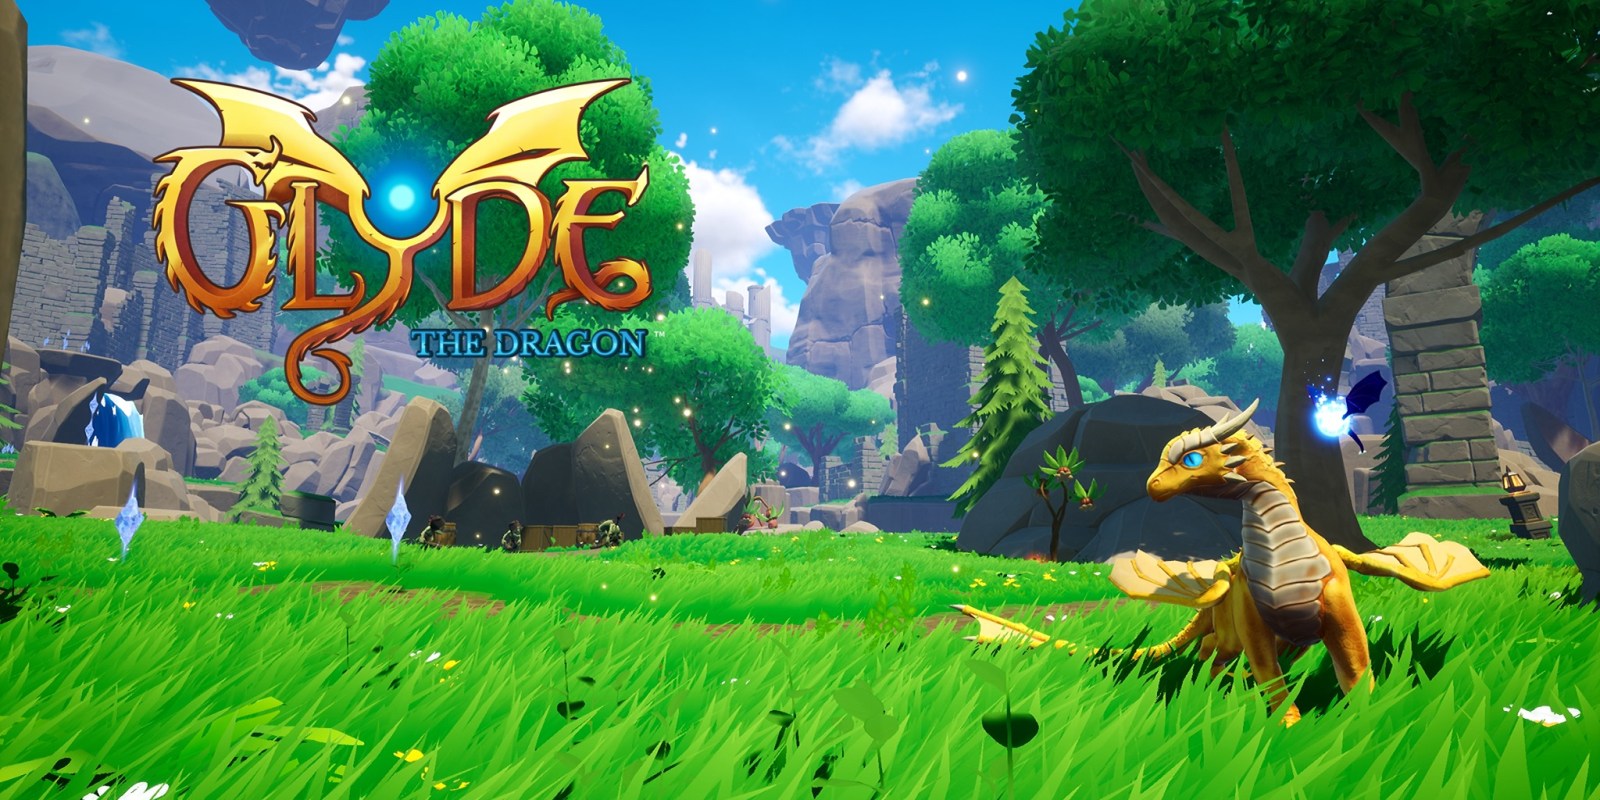 Glyde the Dragon interview with Valefor Games Martin Hernik for Spyro Metroidvania with advanced combat combos and MMO-like boss battles